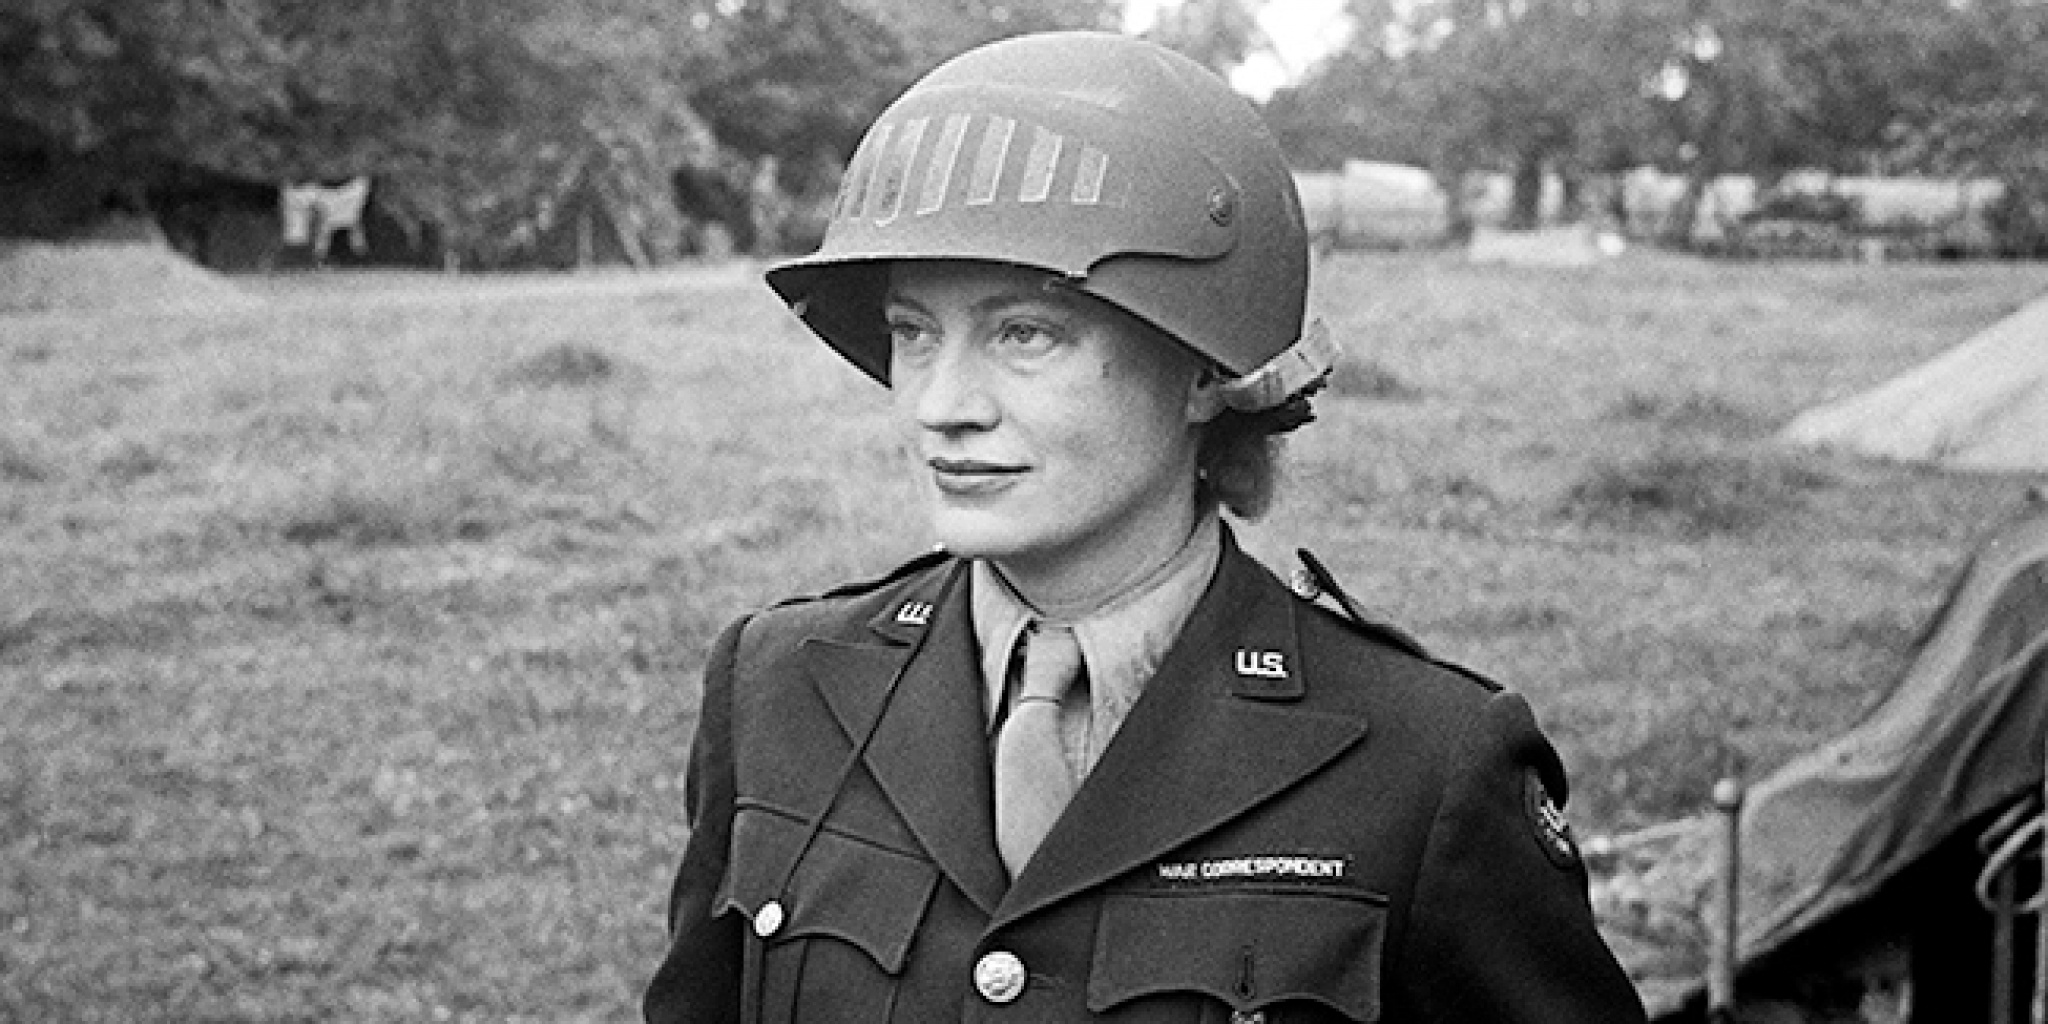 Lee Miller in steel helmet specially designed for using a camera, Normandy, Unknown Photographer, 1944